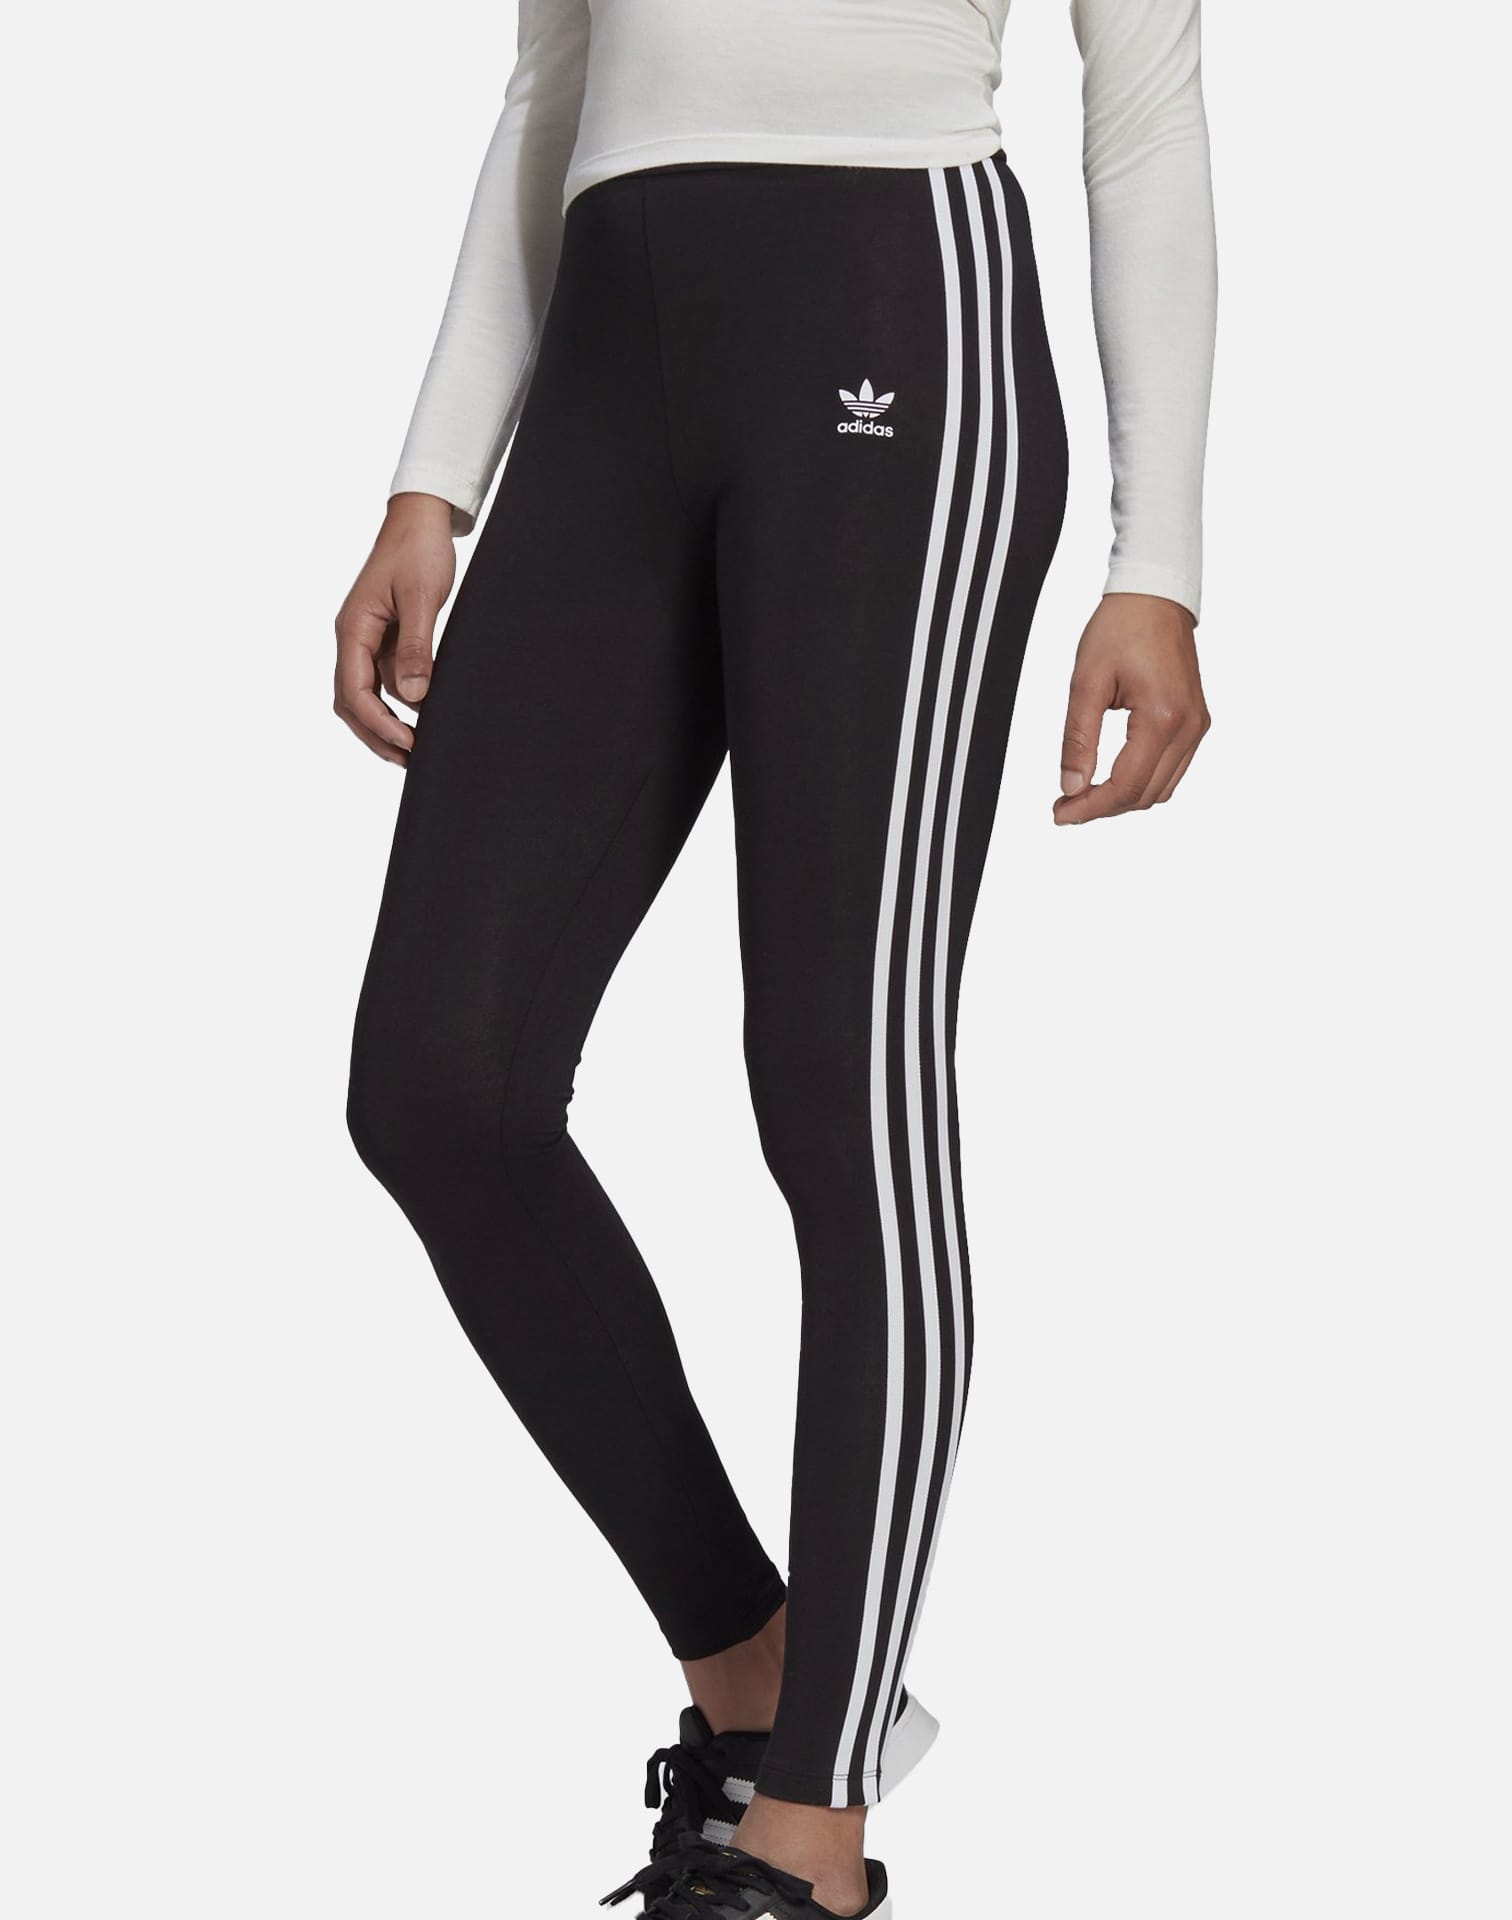 Buy Adidas Women's Athletic Fit Polyester Blend Tights at Amazon.in